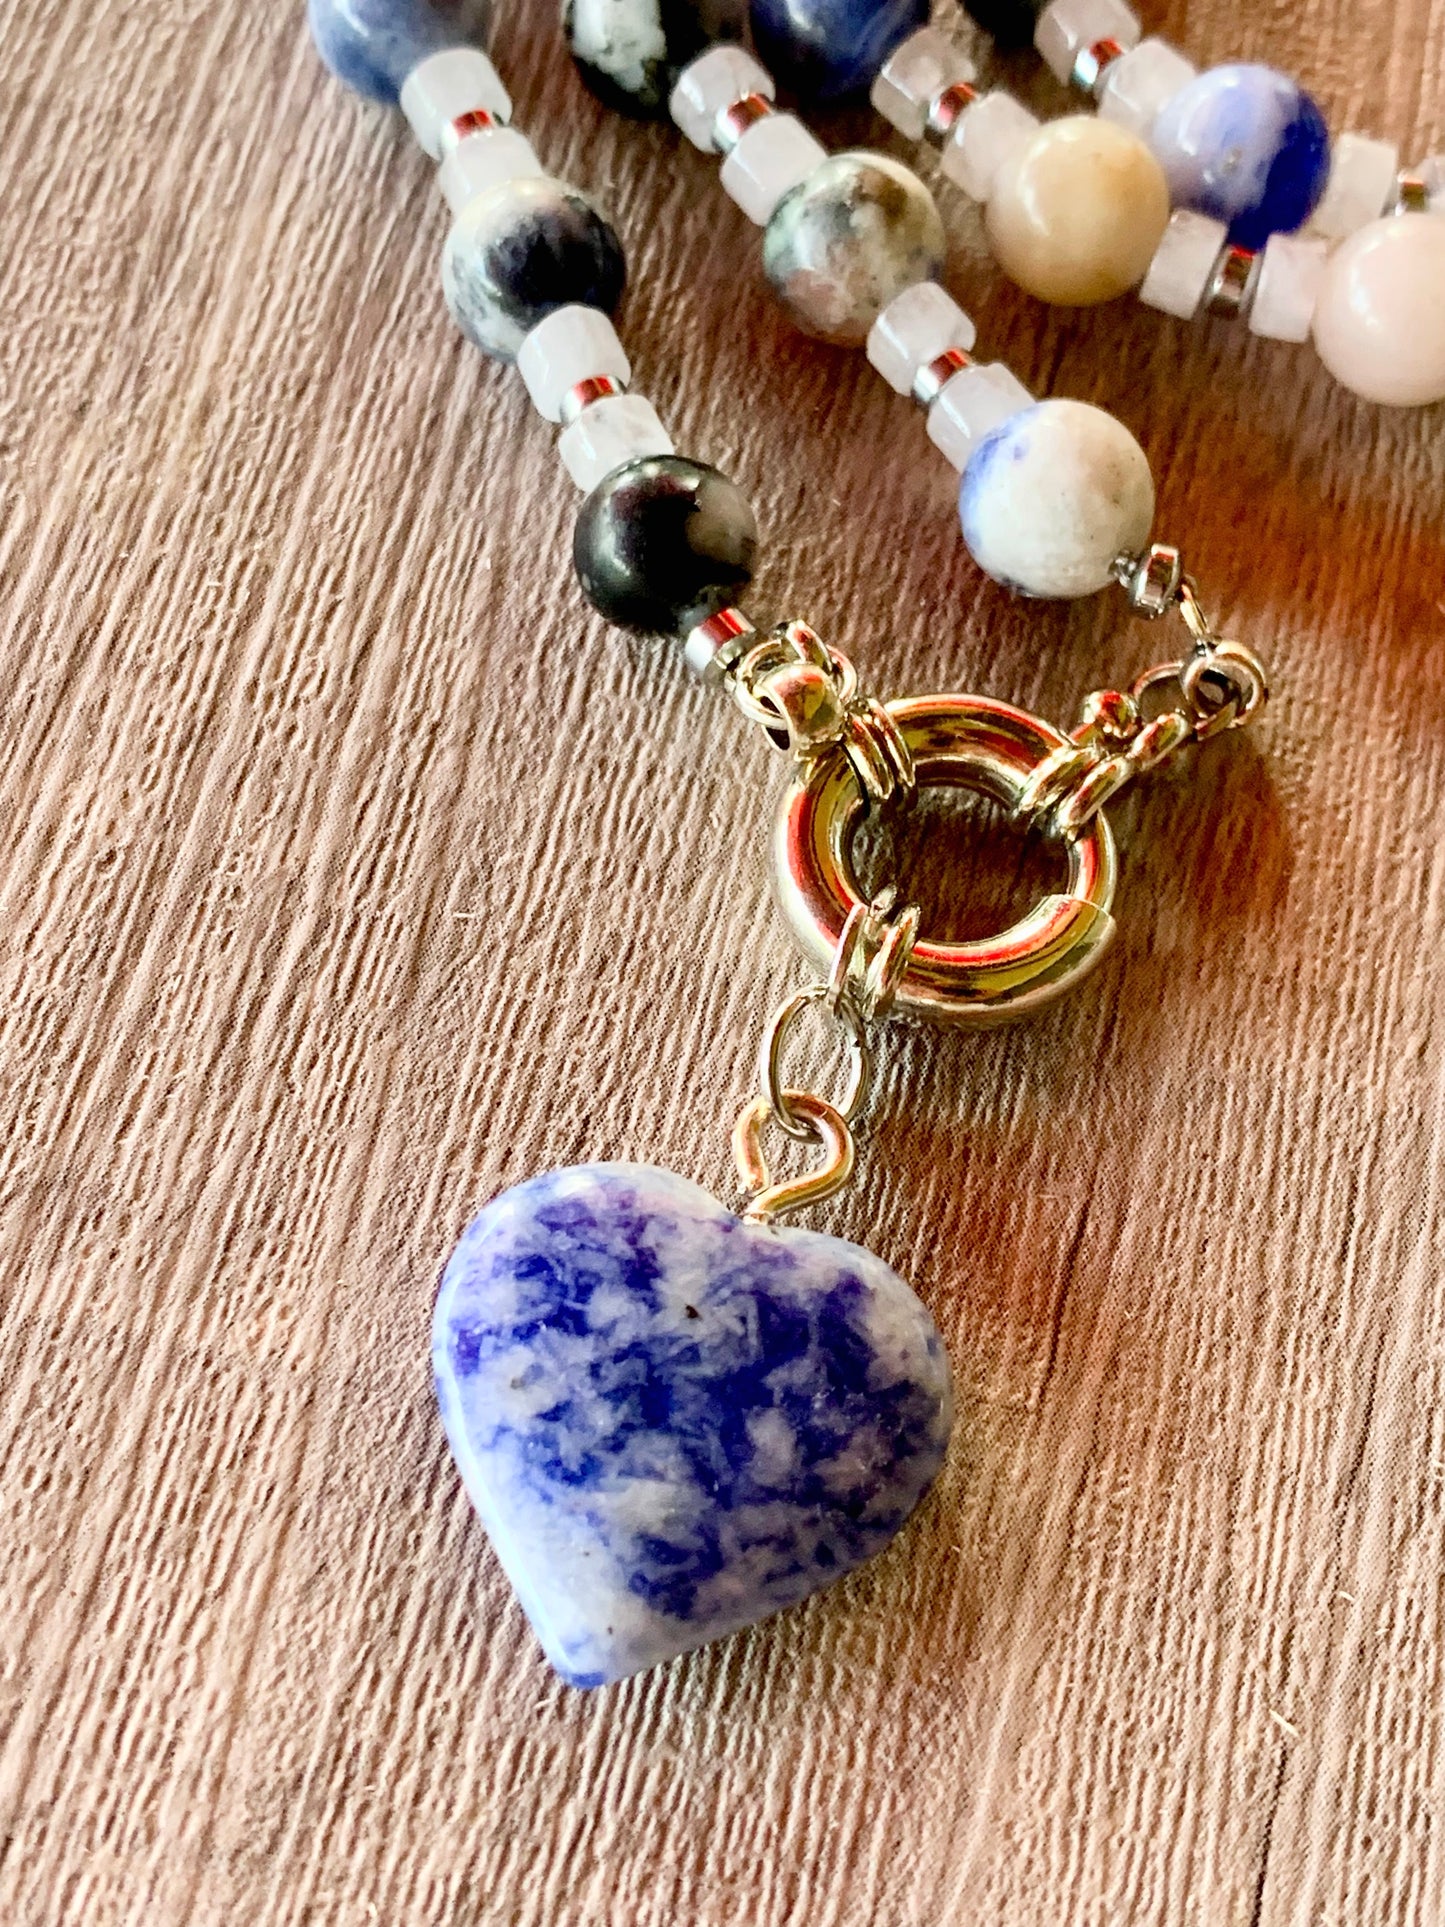 Belinda Handmade Sodalite, Moonstone, and Silver Plated Hematite 30" Necklace with Sodalite Heart Pendant